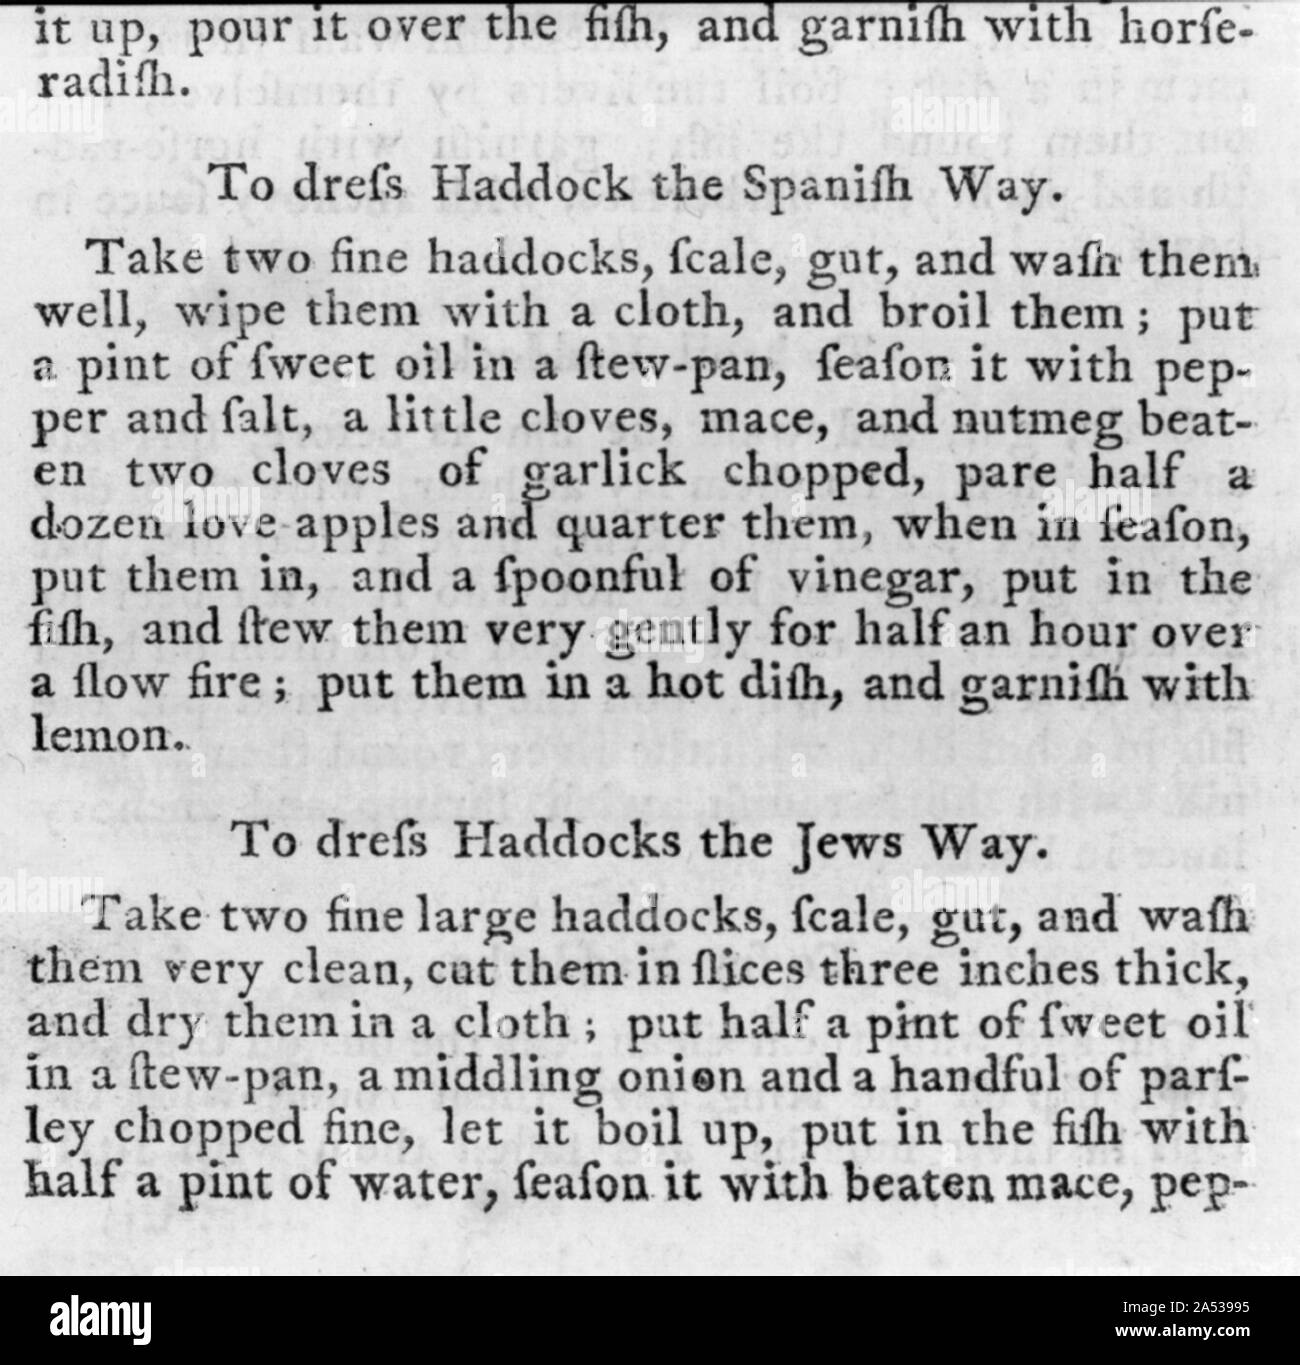 Two recipes for haddock from the first American edition of Richard Briggs' The New Art of Cookery (1792). To dress Haddock the Spanish Way, prepared with the love apple or tomato, and To dress Haddock the Jews Way prepared with sweet oil, onion and parsley Stock Photo